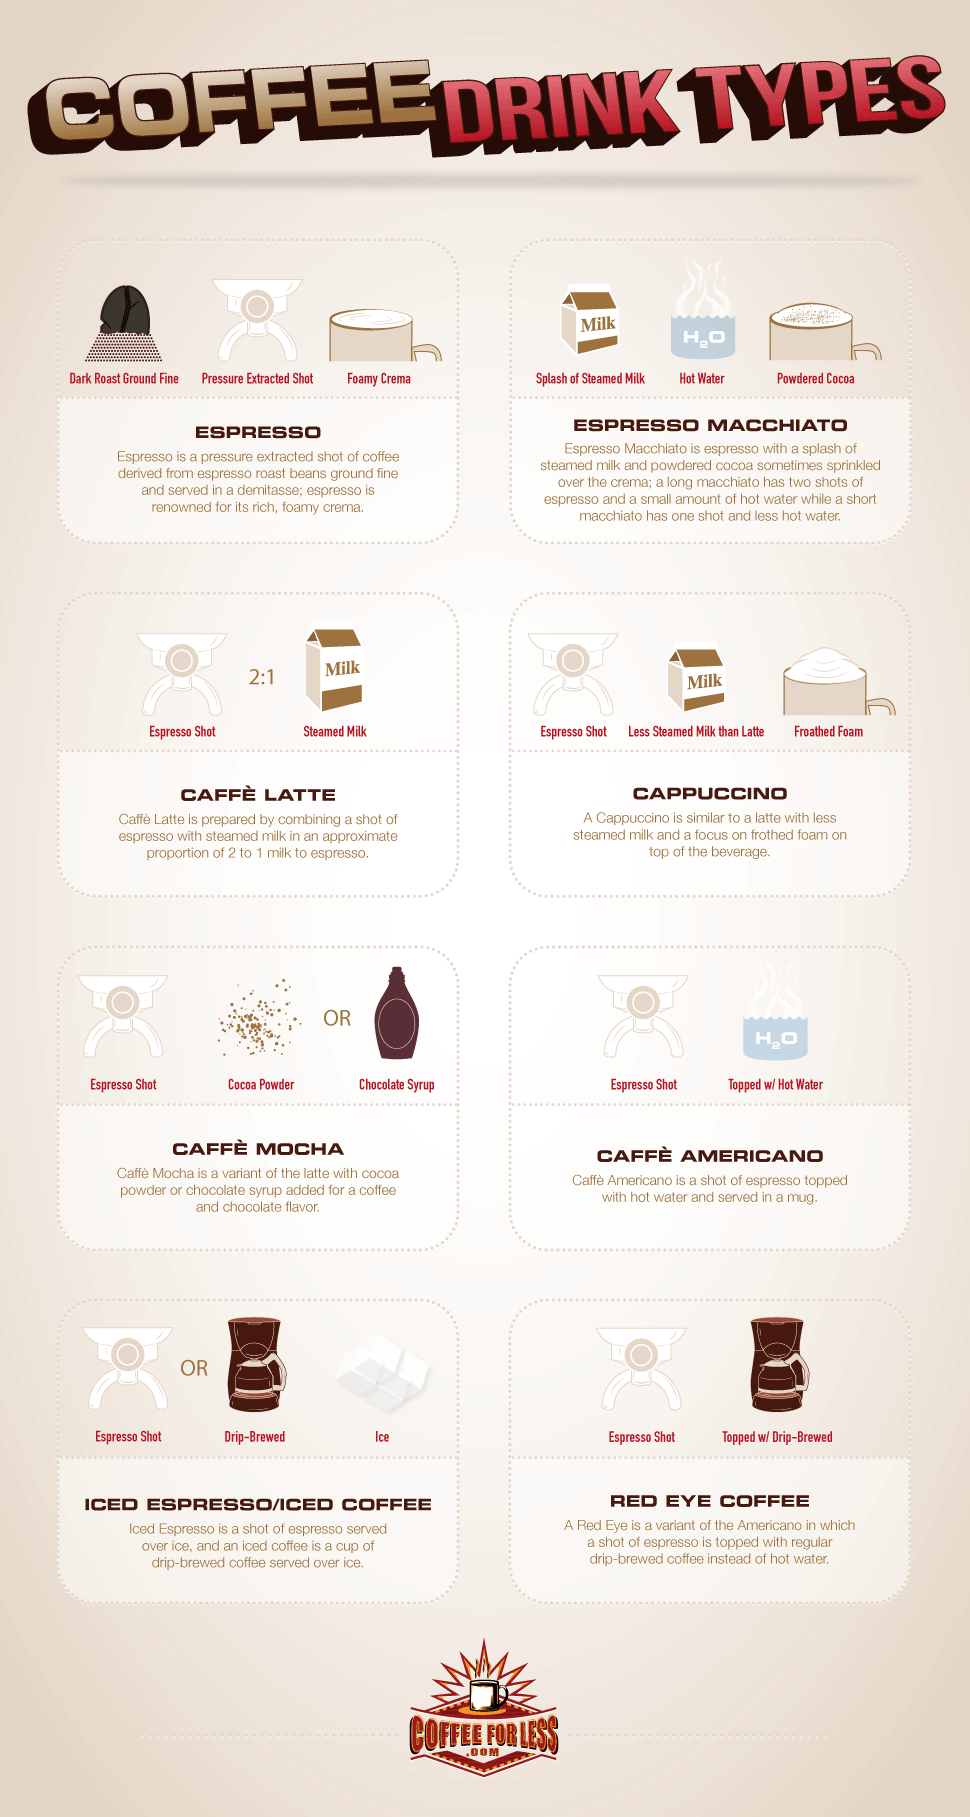 8 coffee drink types discussed here let you know what's in your favorite cup of coffee.